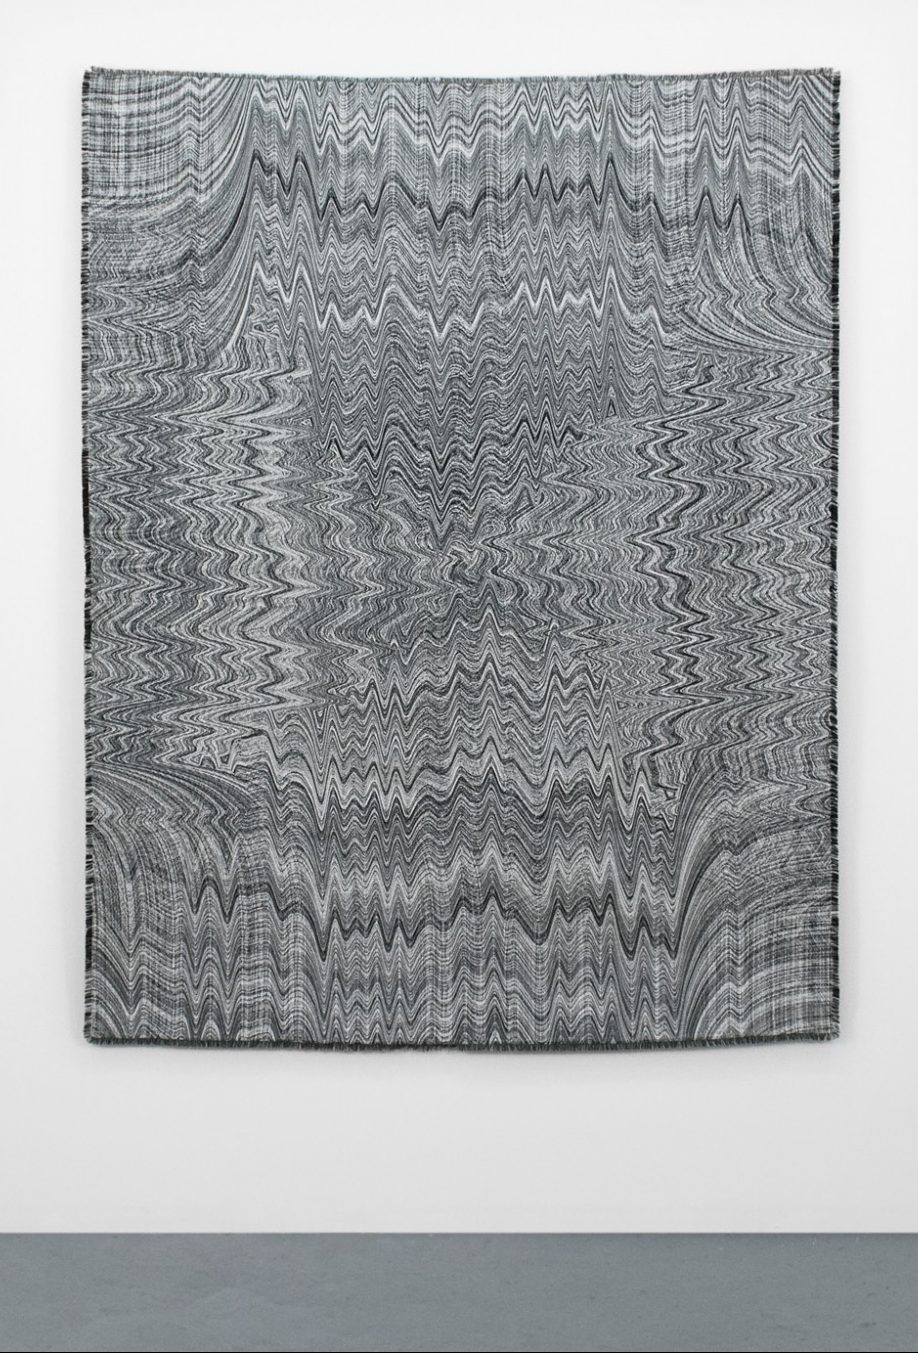 Squint is a data visualization of electronic, biometric measurements. Imagery in the Squint tapestry was created as the artist conducted a biometric reading of the electricity levels in her eye muscle as she squinted, using electromyography (EMG).